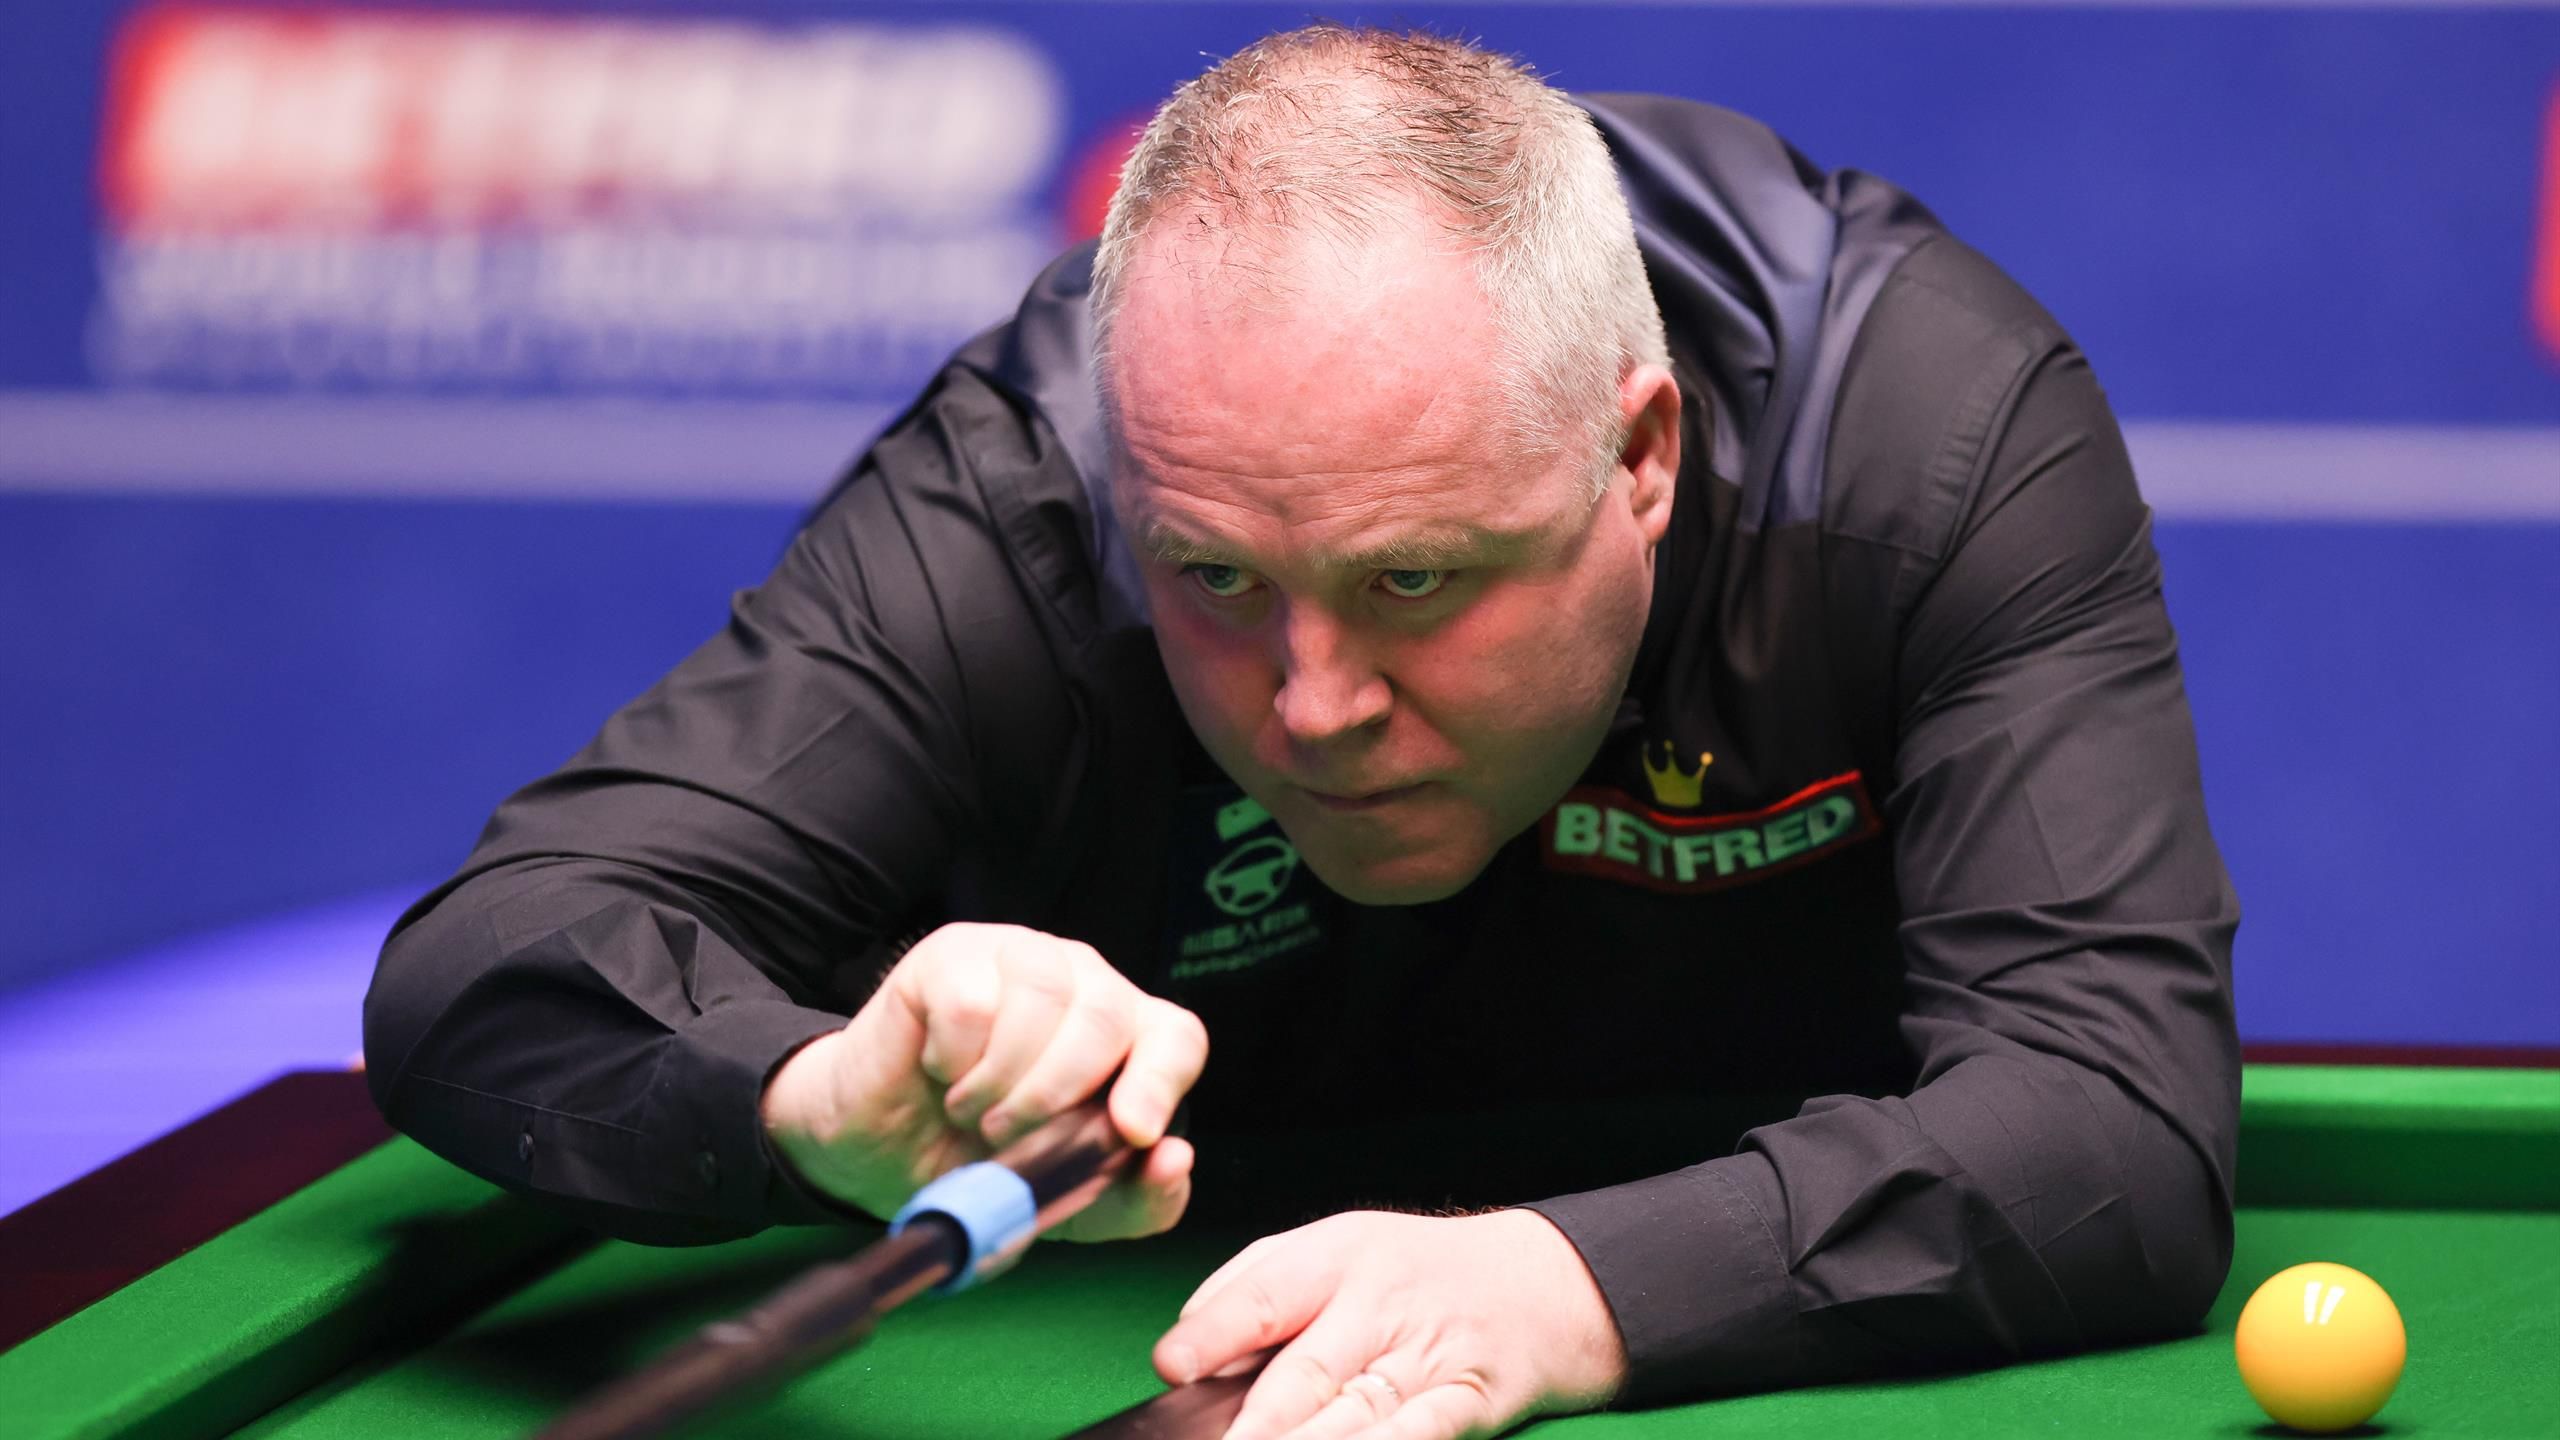 Champion of Champions 2021 LIVE - John Higgins faces Yan Bingtao for place in final in Masters rematch